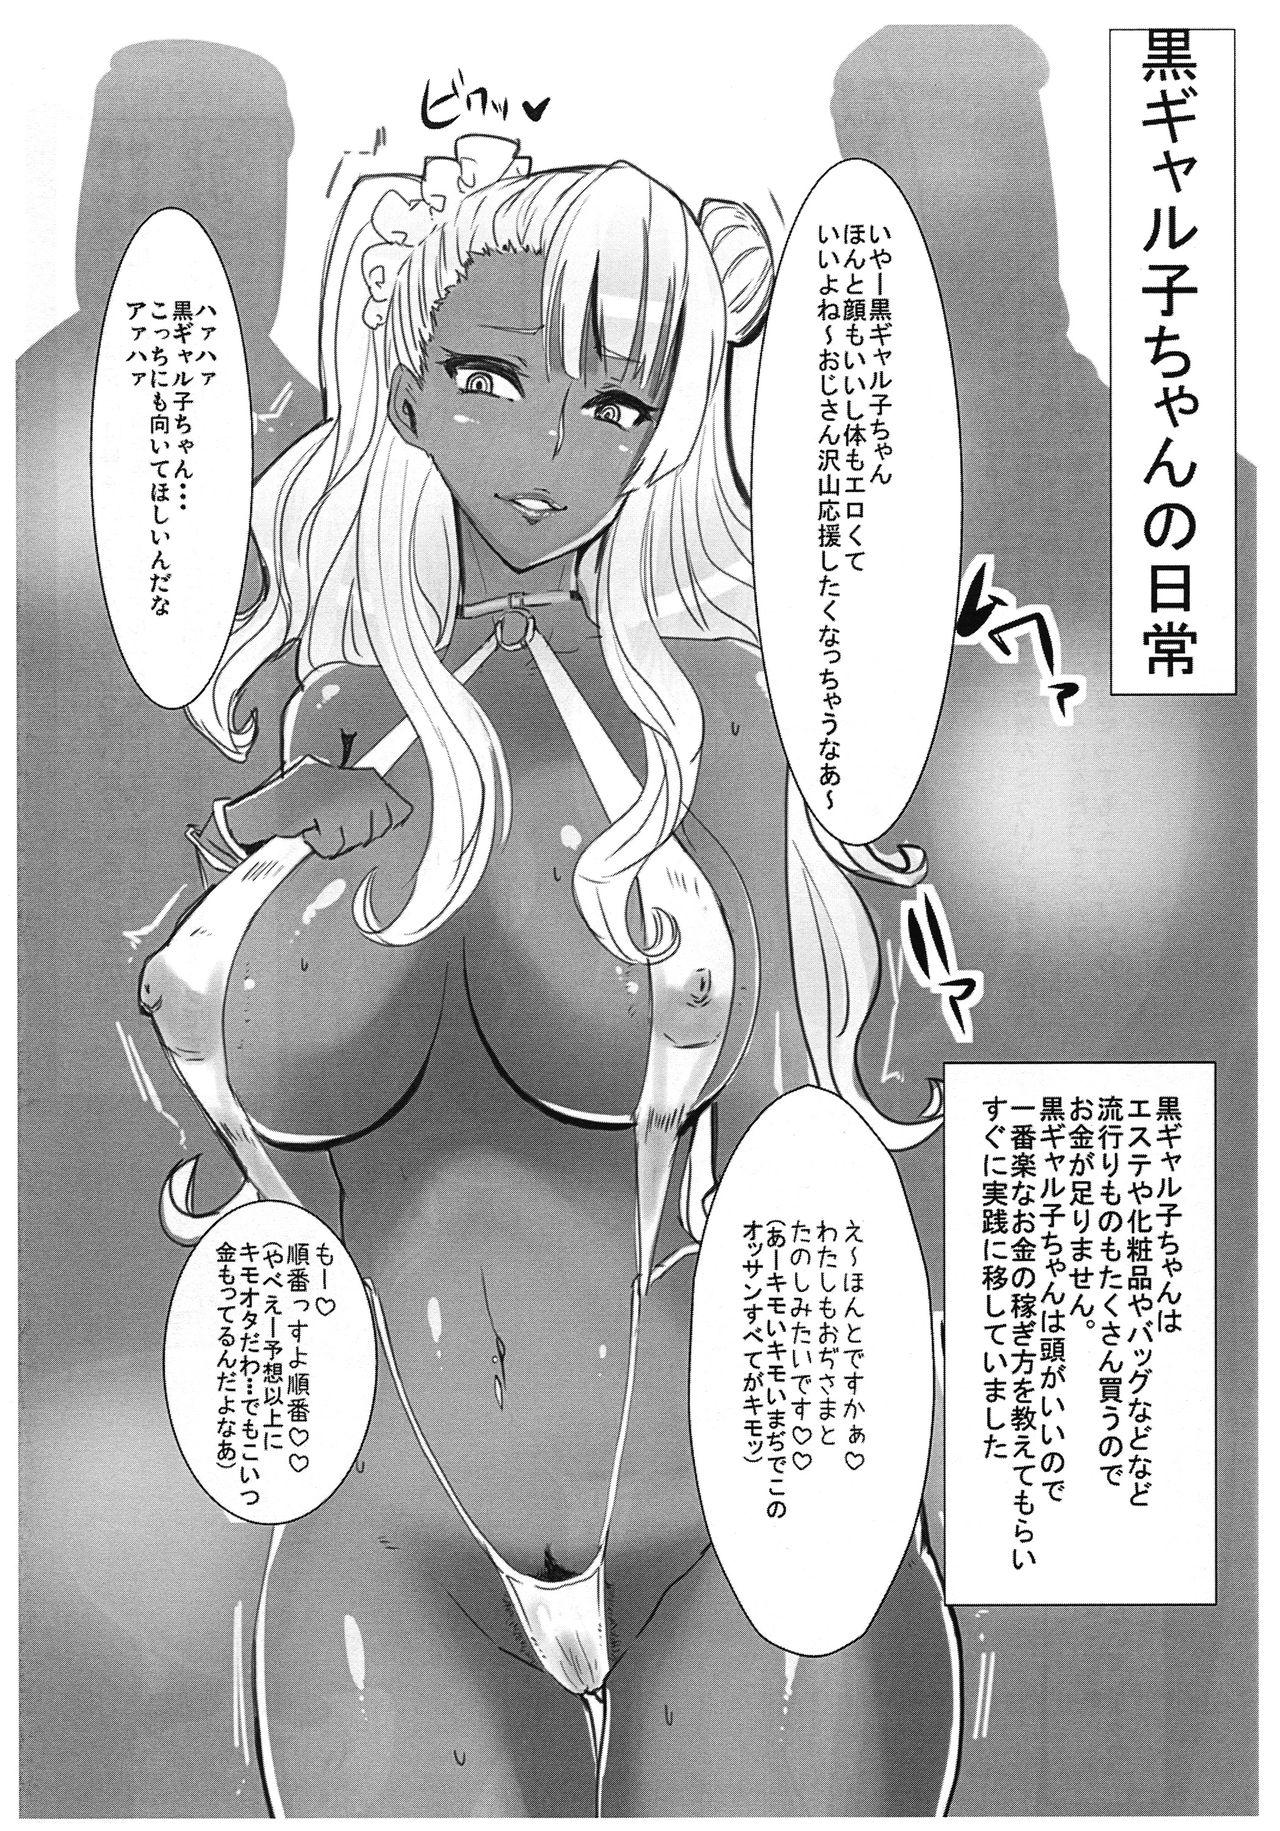 Stunning PROSTITUTE² +VER3.0 - Oshiete galko chan Dirty - Page 10